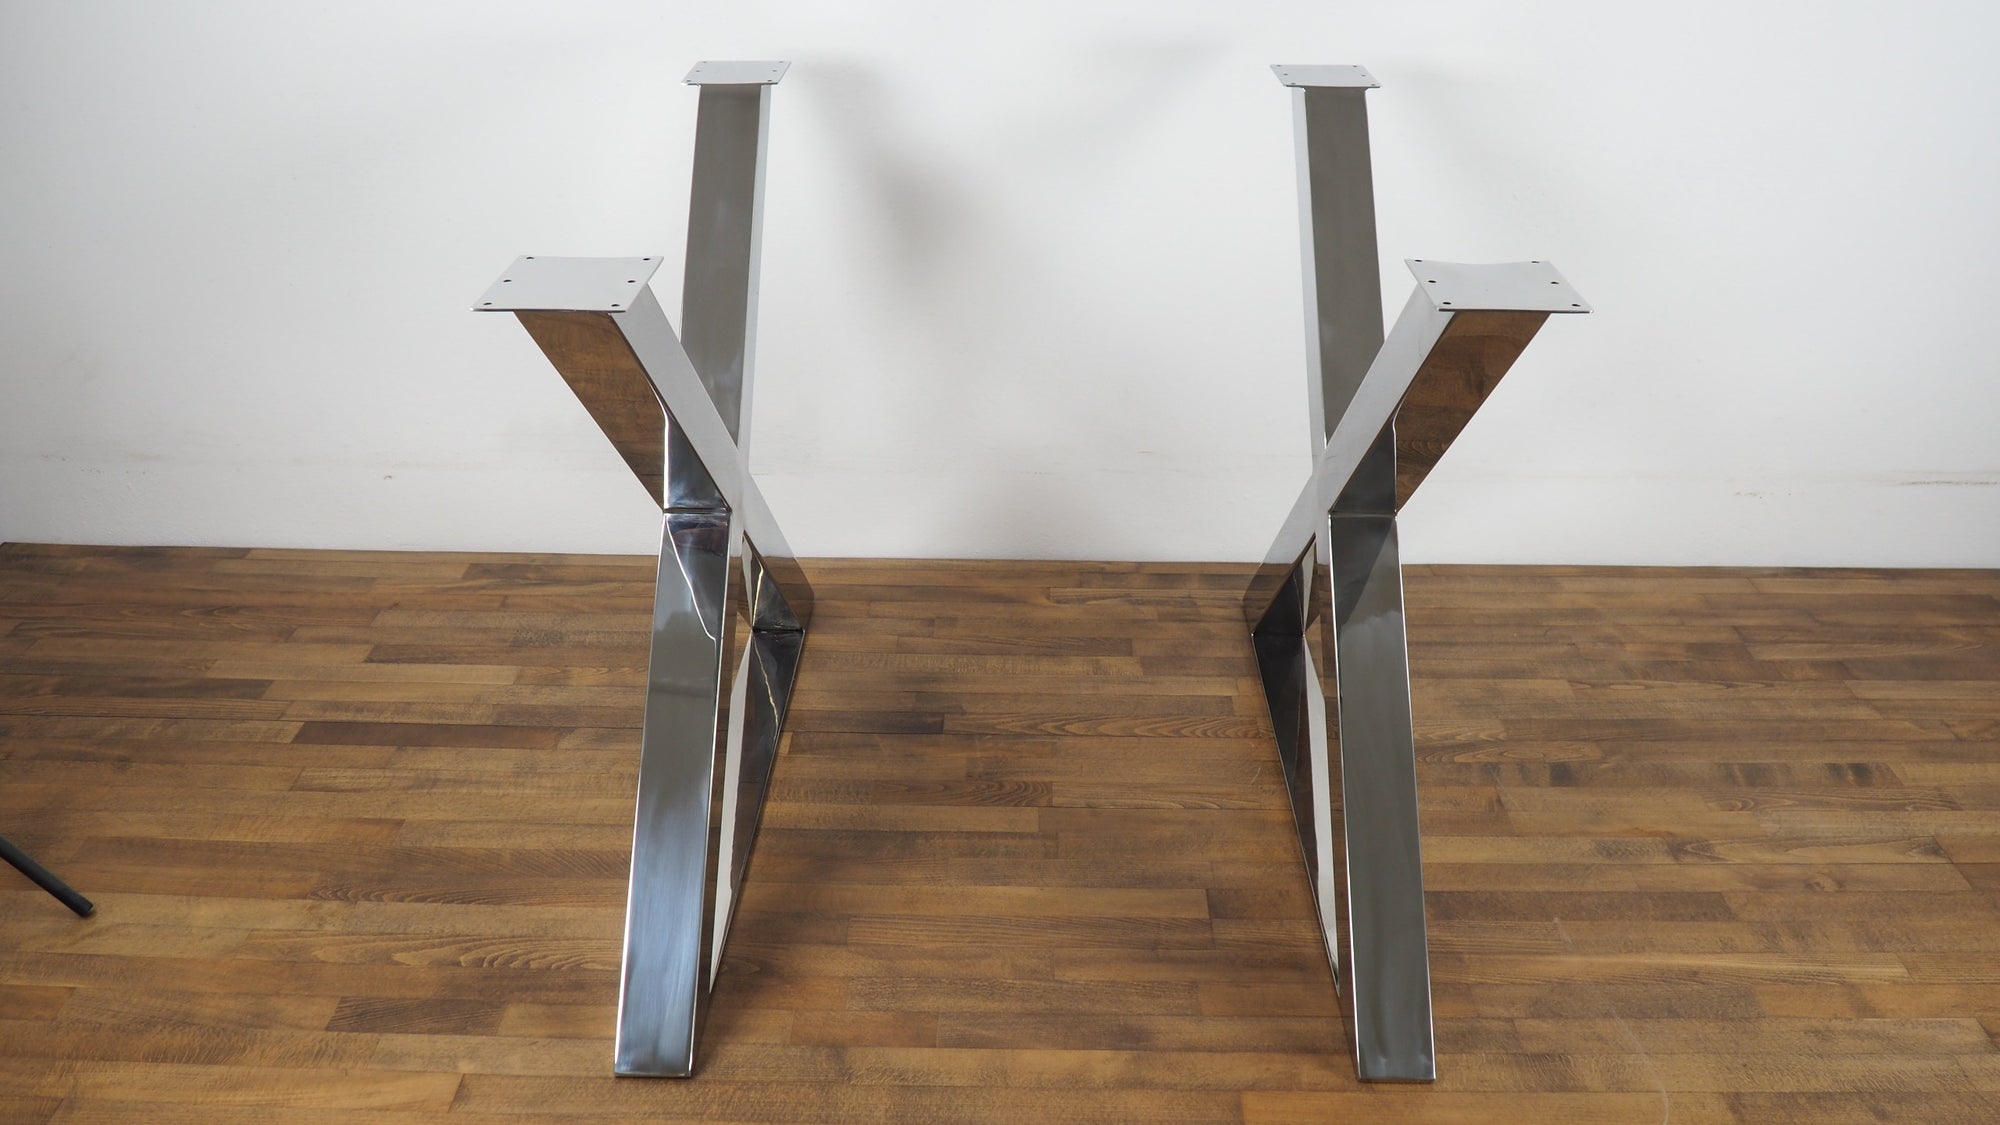 28" X Frame Table Legs, Base Width 35" , Height 26" To 32" Set(2)